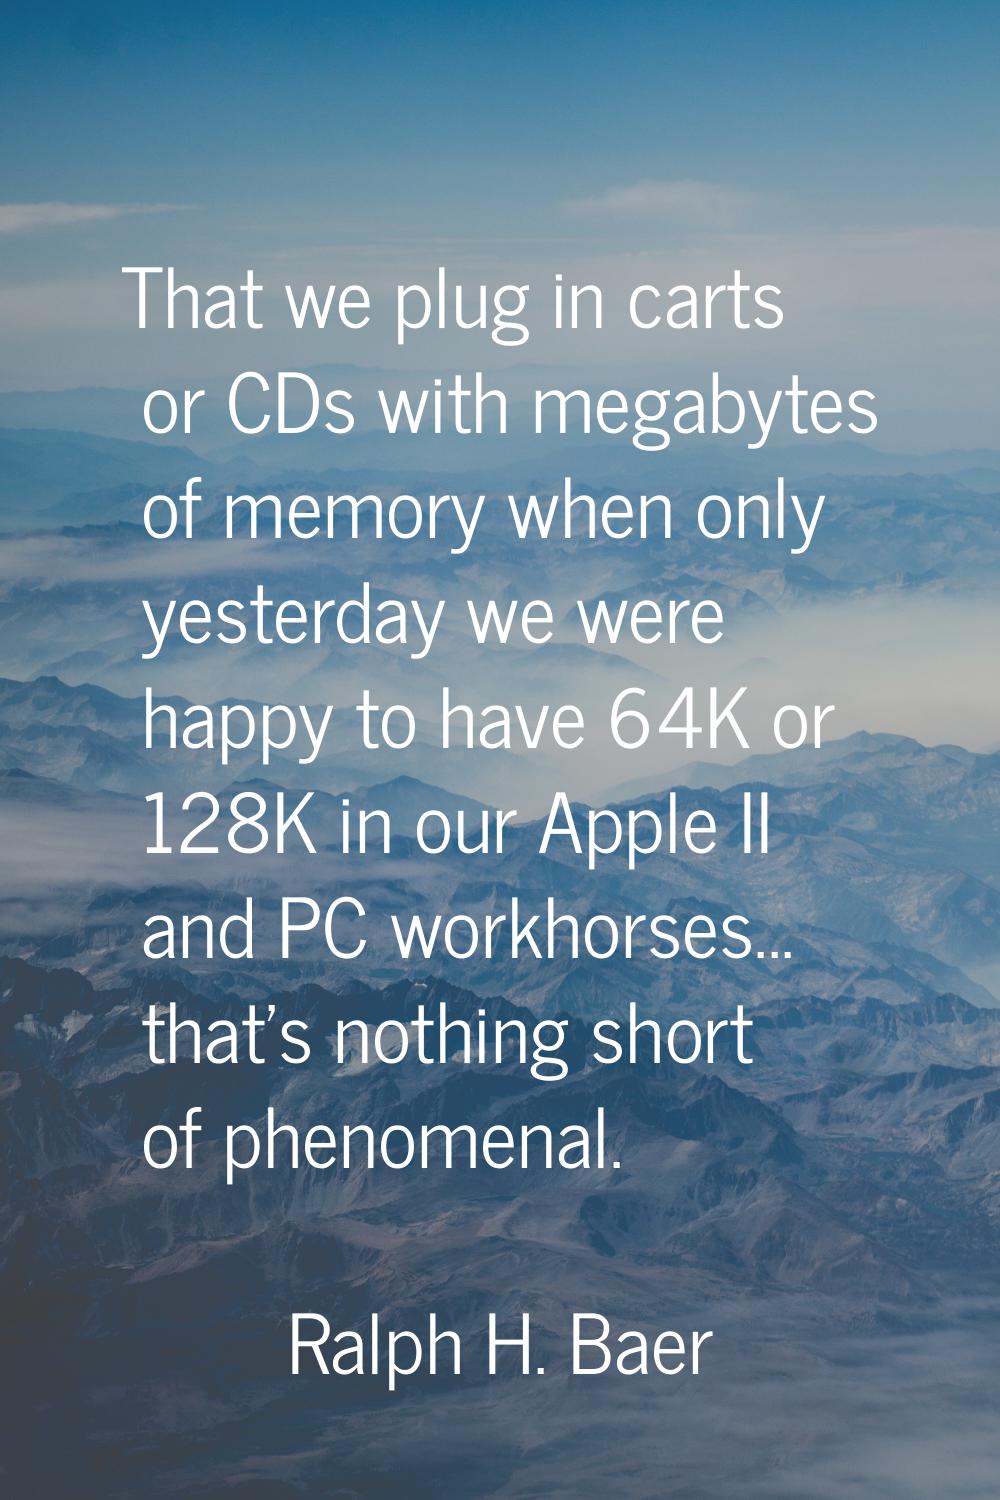 That we plug in carts or CDs with megabytes of memory when only yesterday we were happy to have 64K